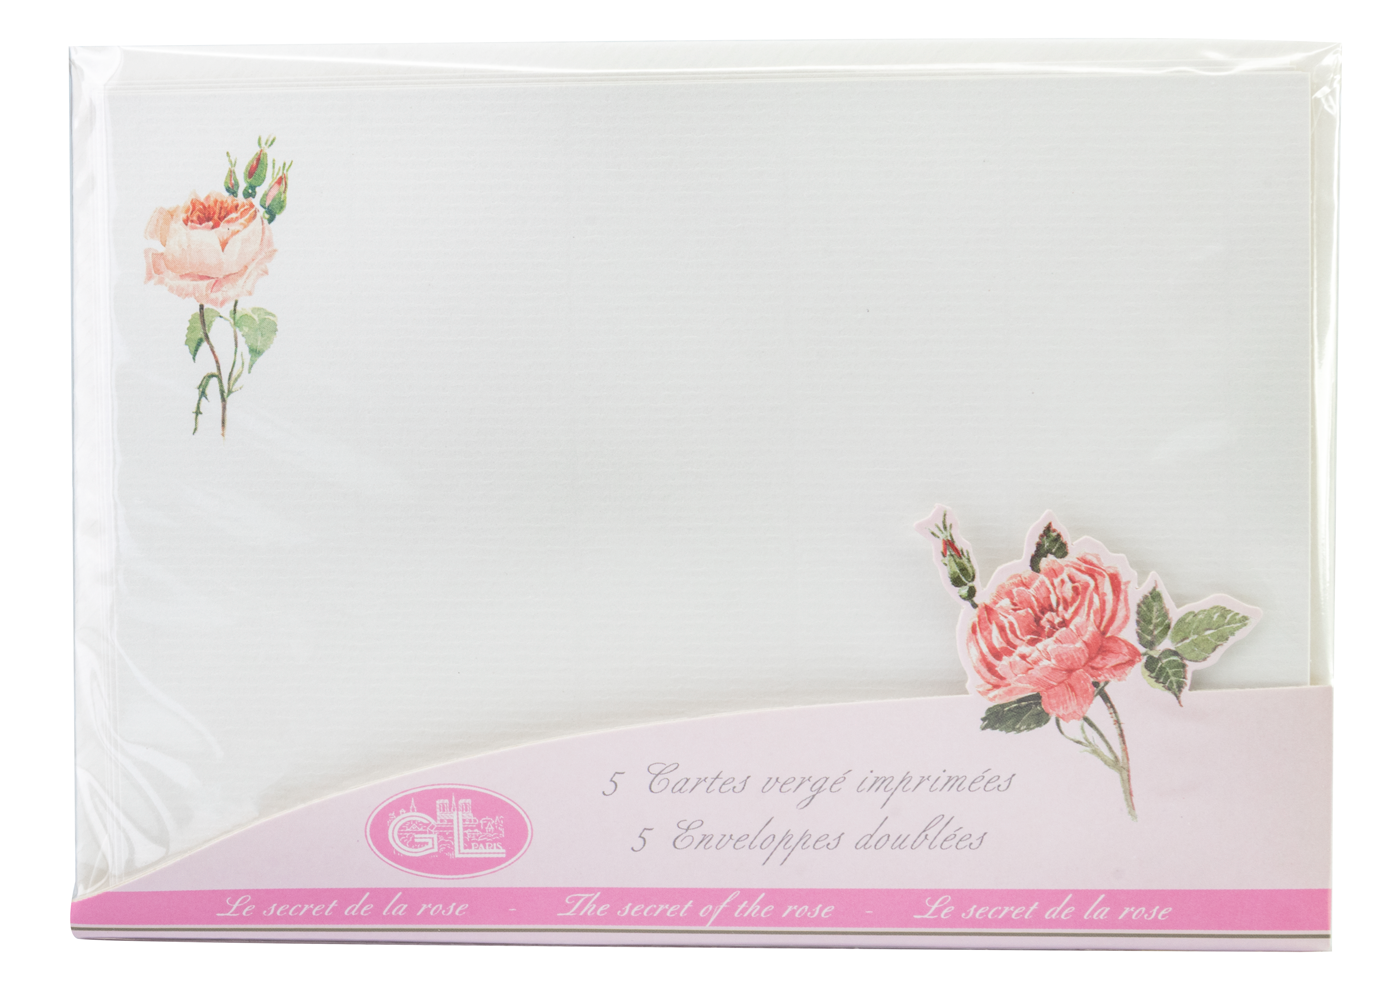 G. Lalo " Secrets of the Rose" Correspondence Cards with Envelopes